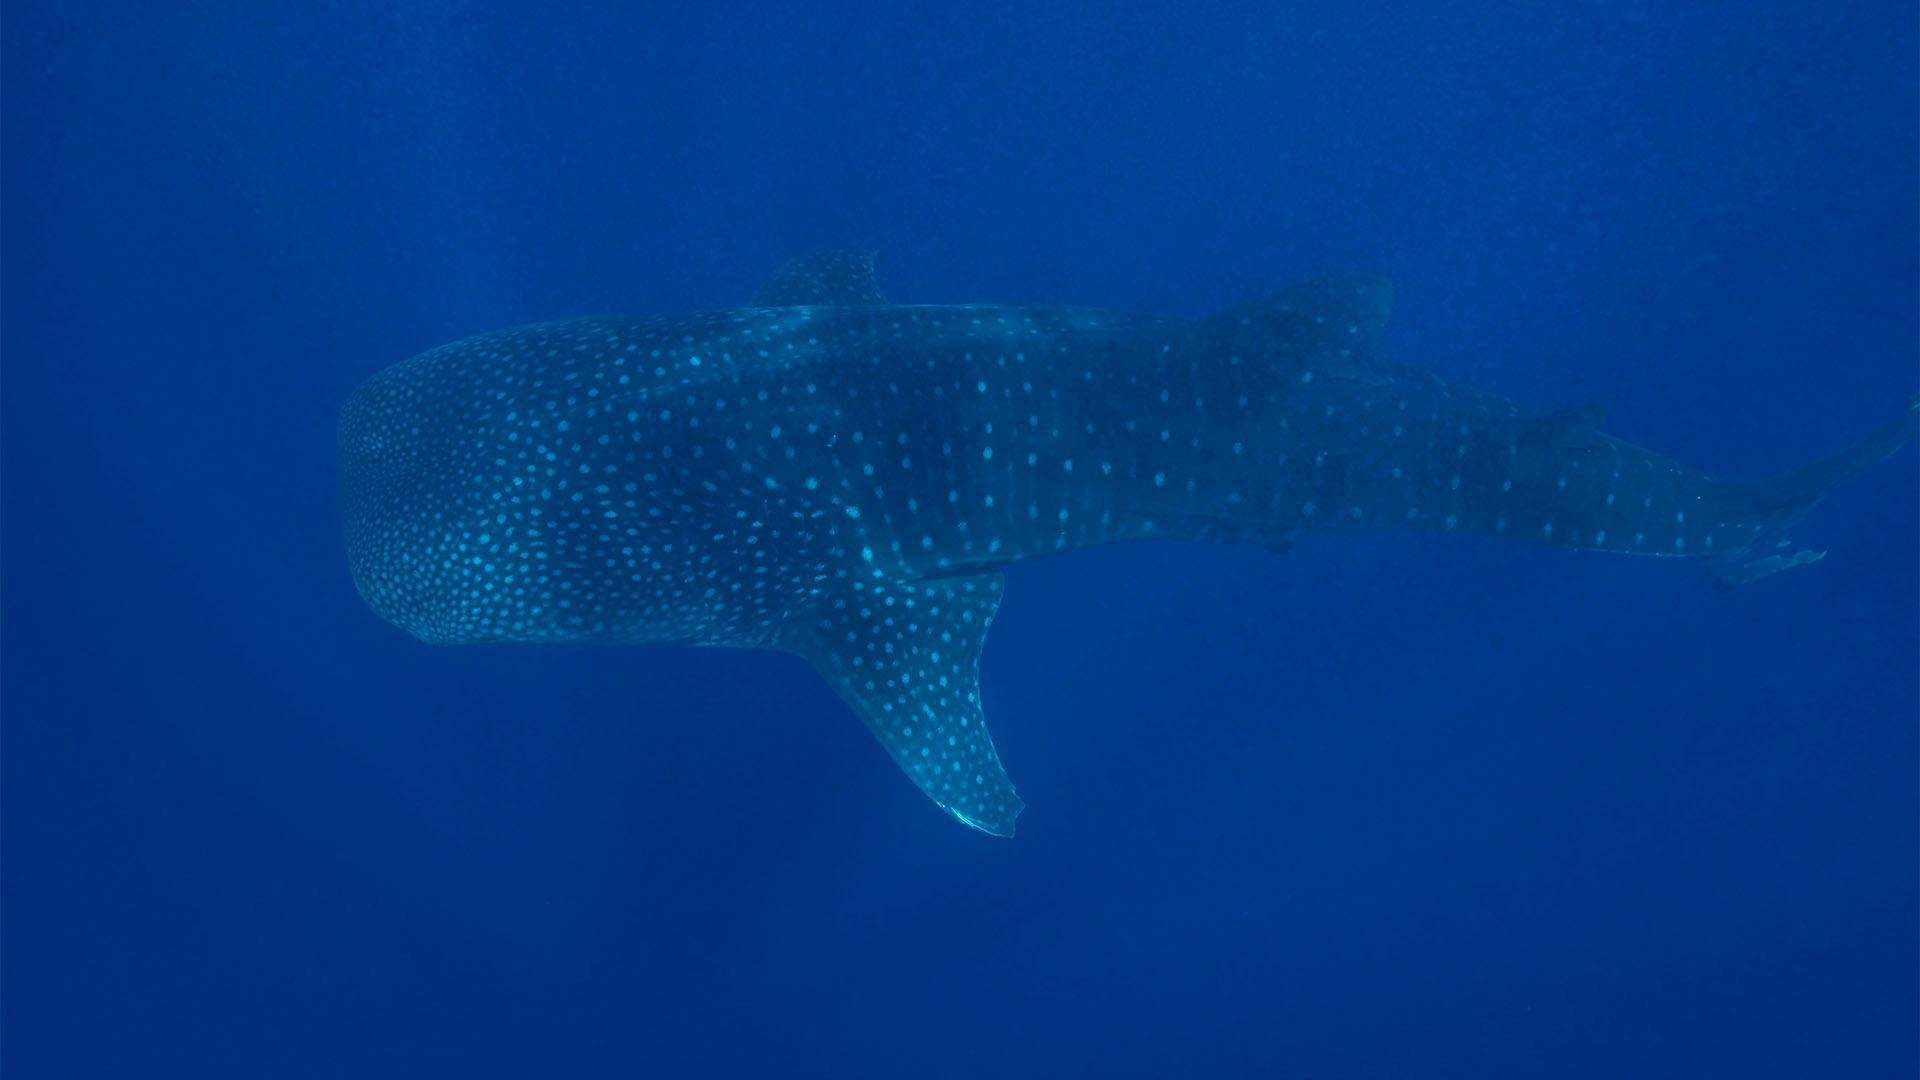 Whale shark feeds and rests in Revillagigedo Archipelago marine protected area.